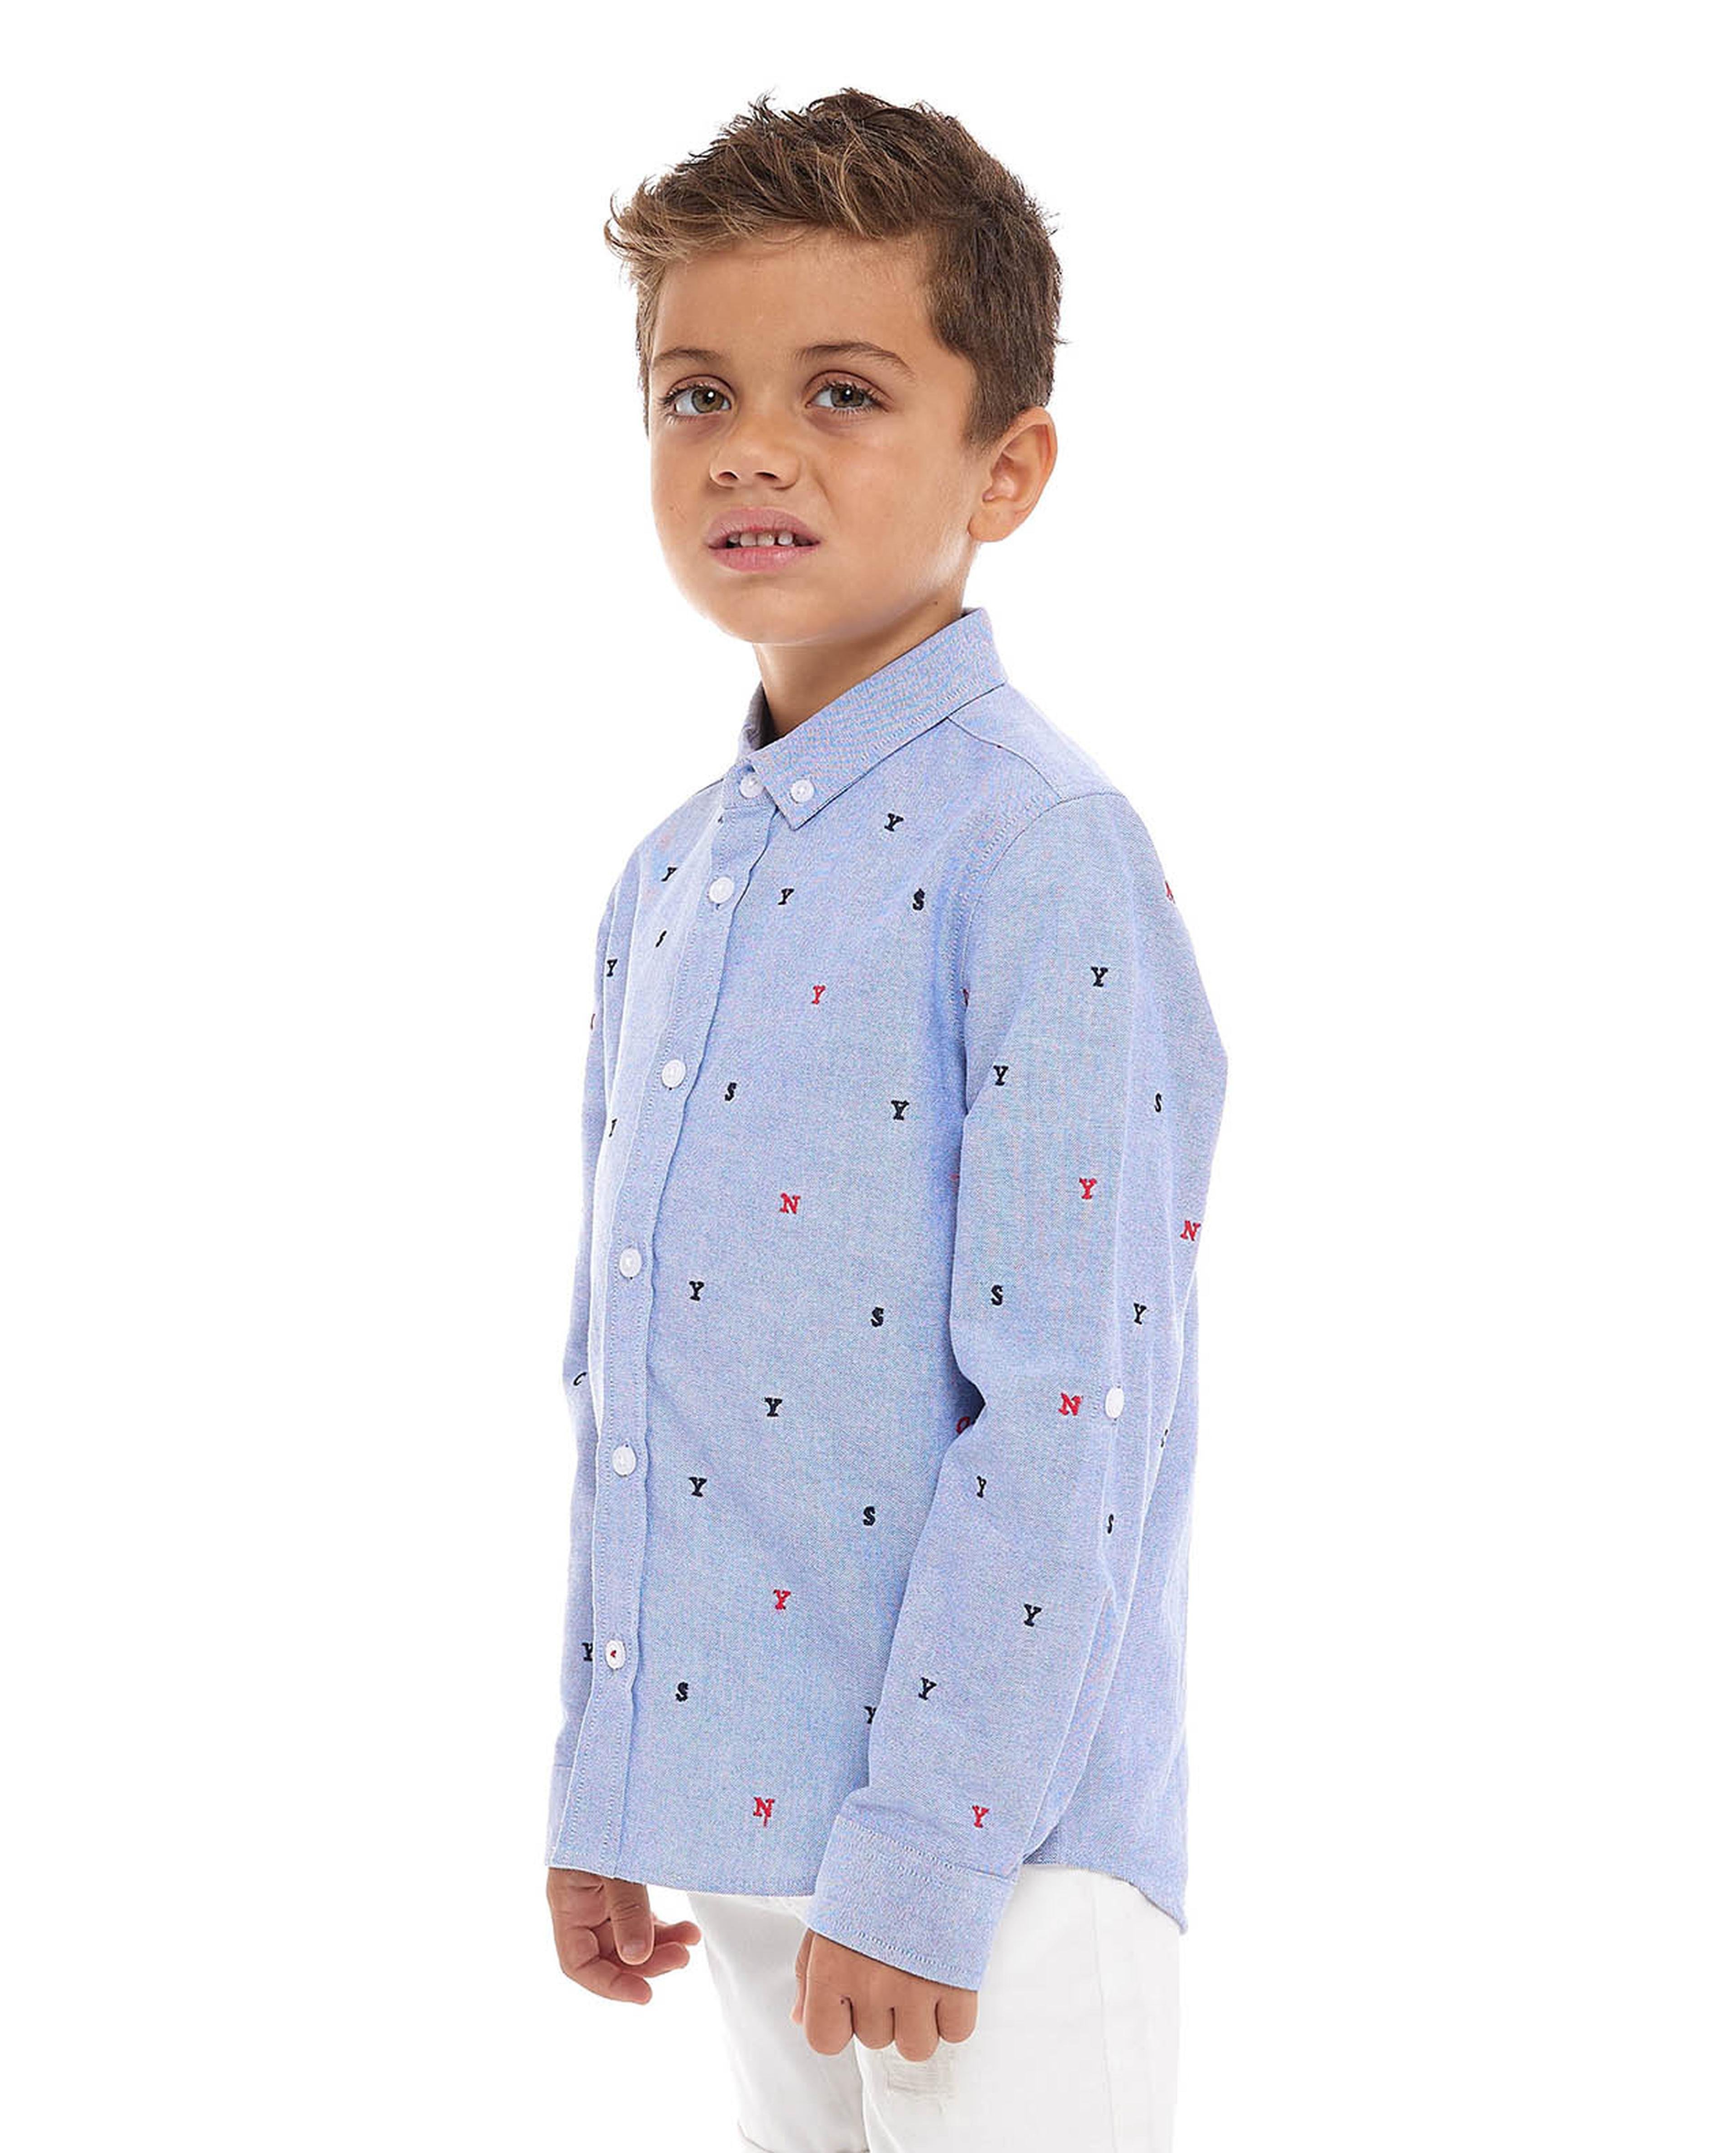 Embroidered Shirt with Classic Collar and Long Sleeves